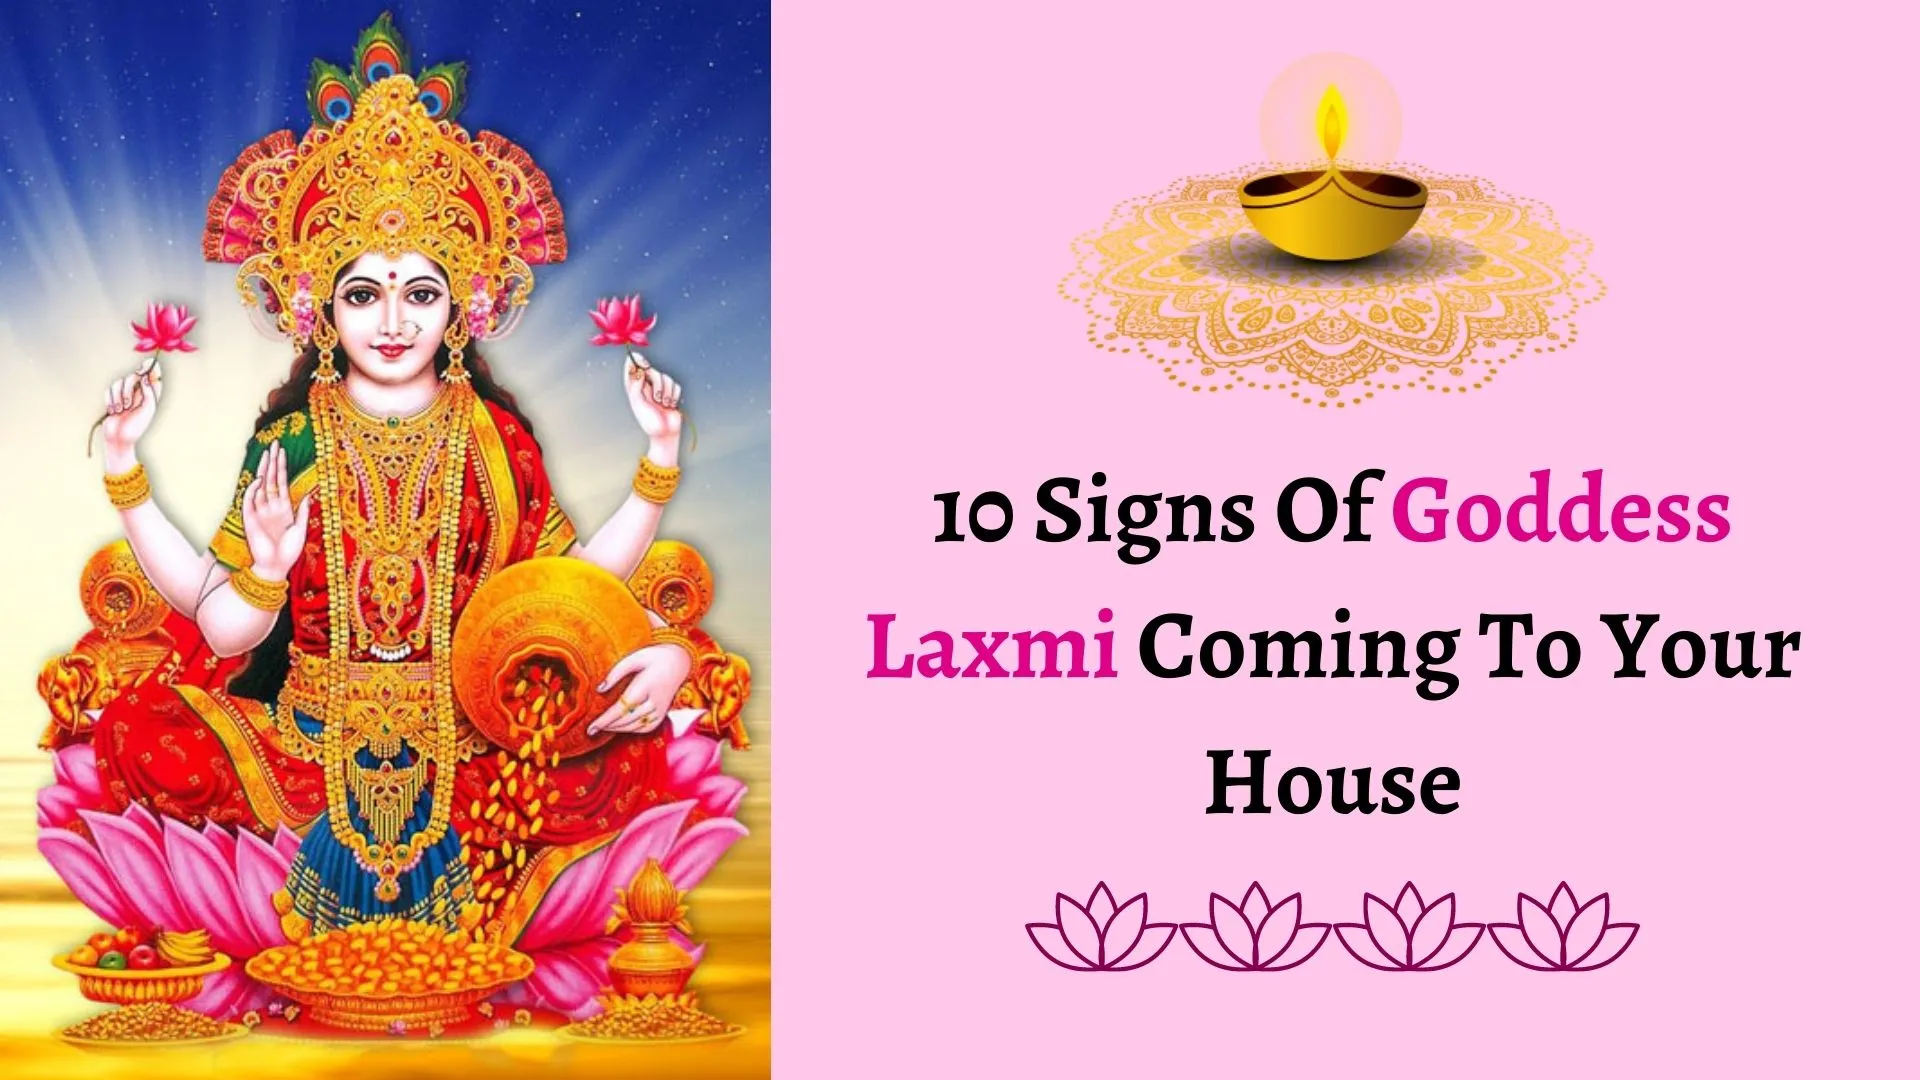 10 Signs Of Goddess Laxmi Coming To Your House